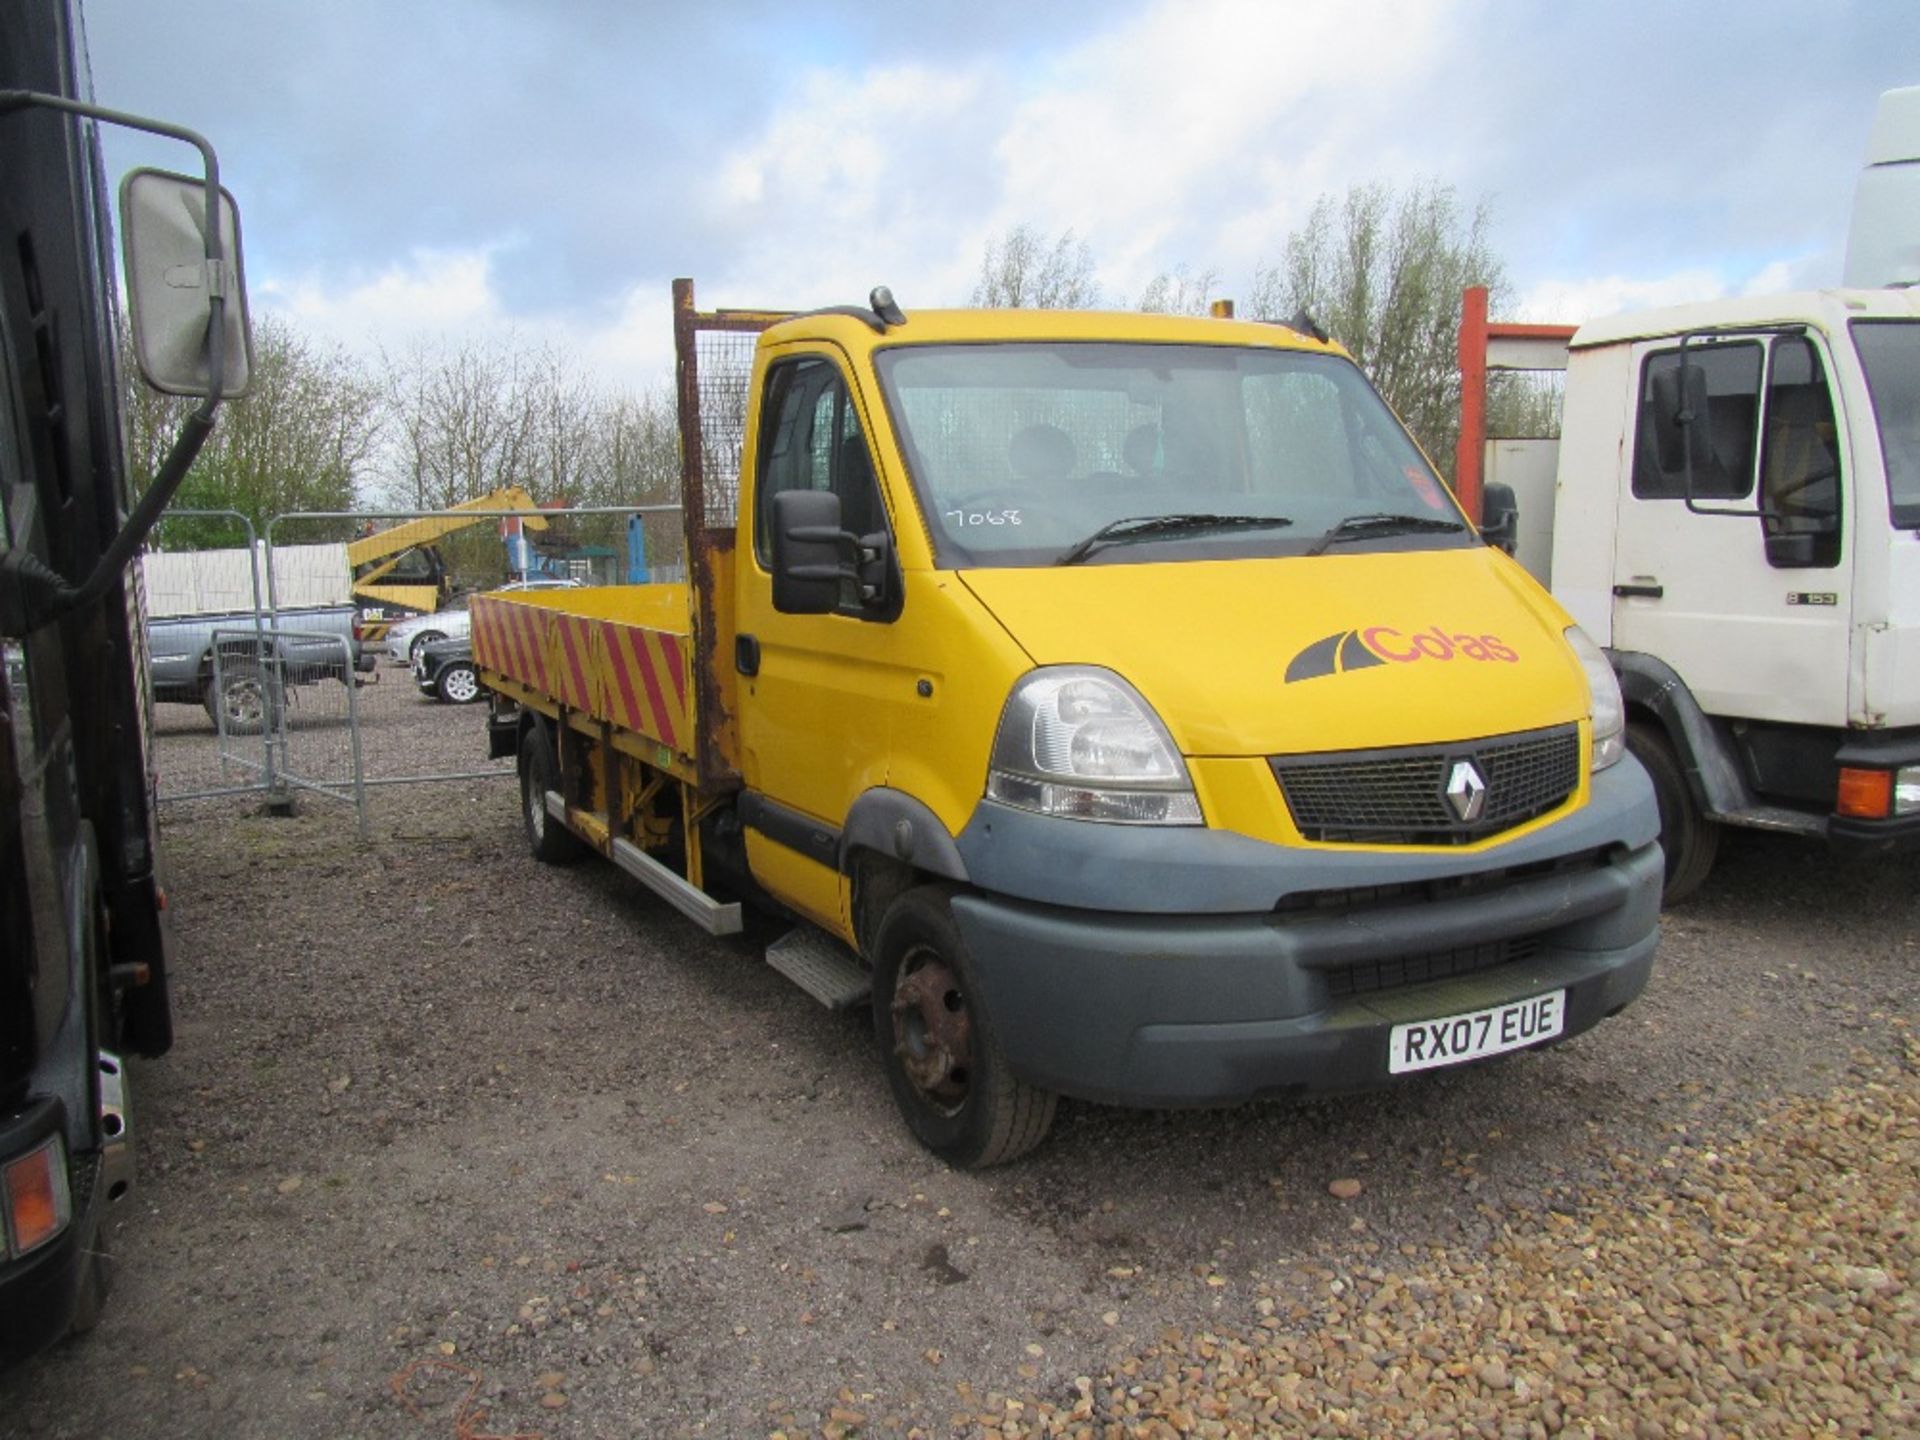 2007 Renault Mascot 3 Litre Diesel Flat Bed Dropside Truck c/w Central Locking. Reg Docs will be - Image 3 of 7